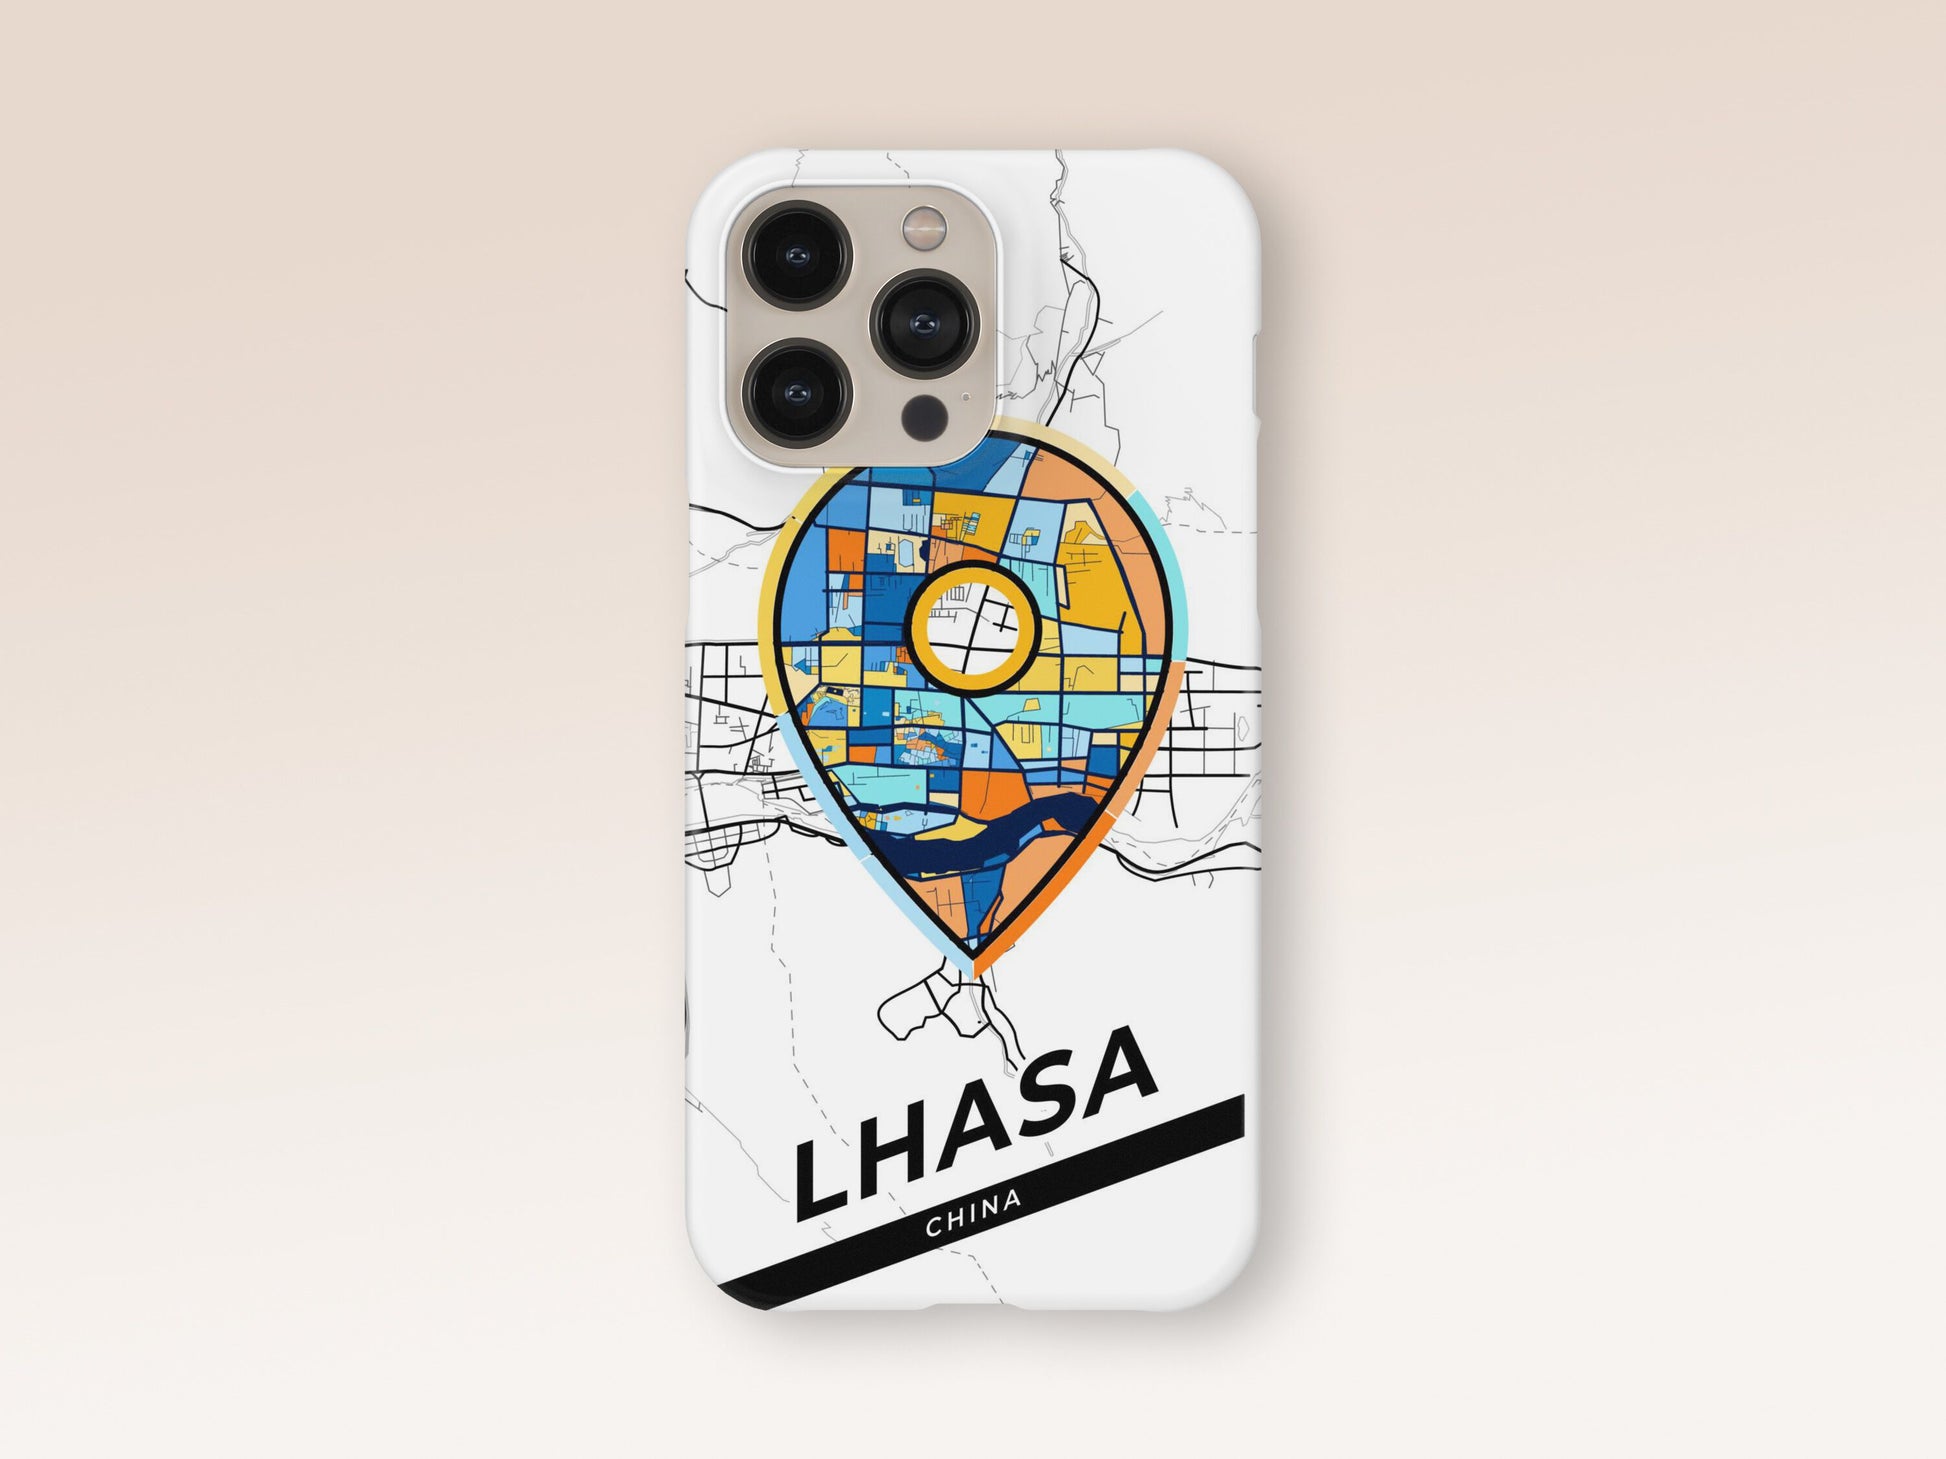 Lhasa China slim phone case with colorful icon. Birthday, wedding or housewarming gift. Couple match cases. 1